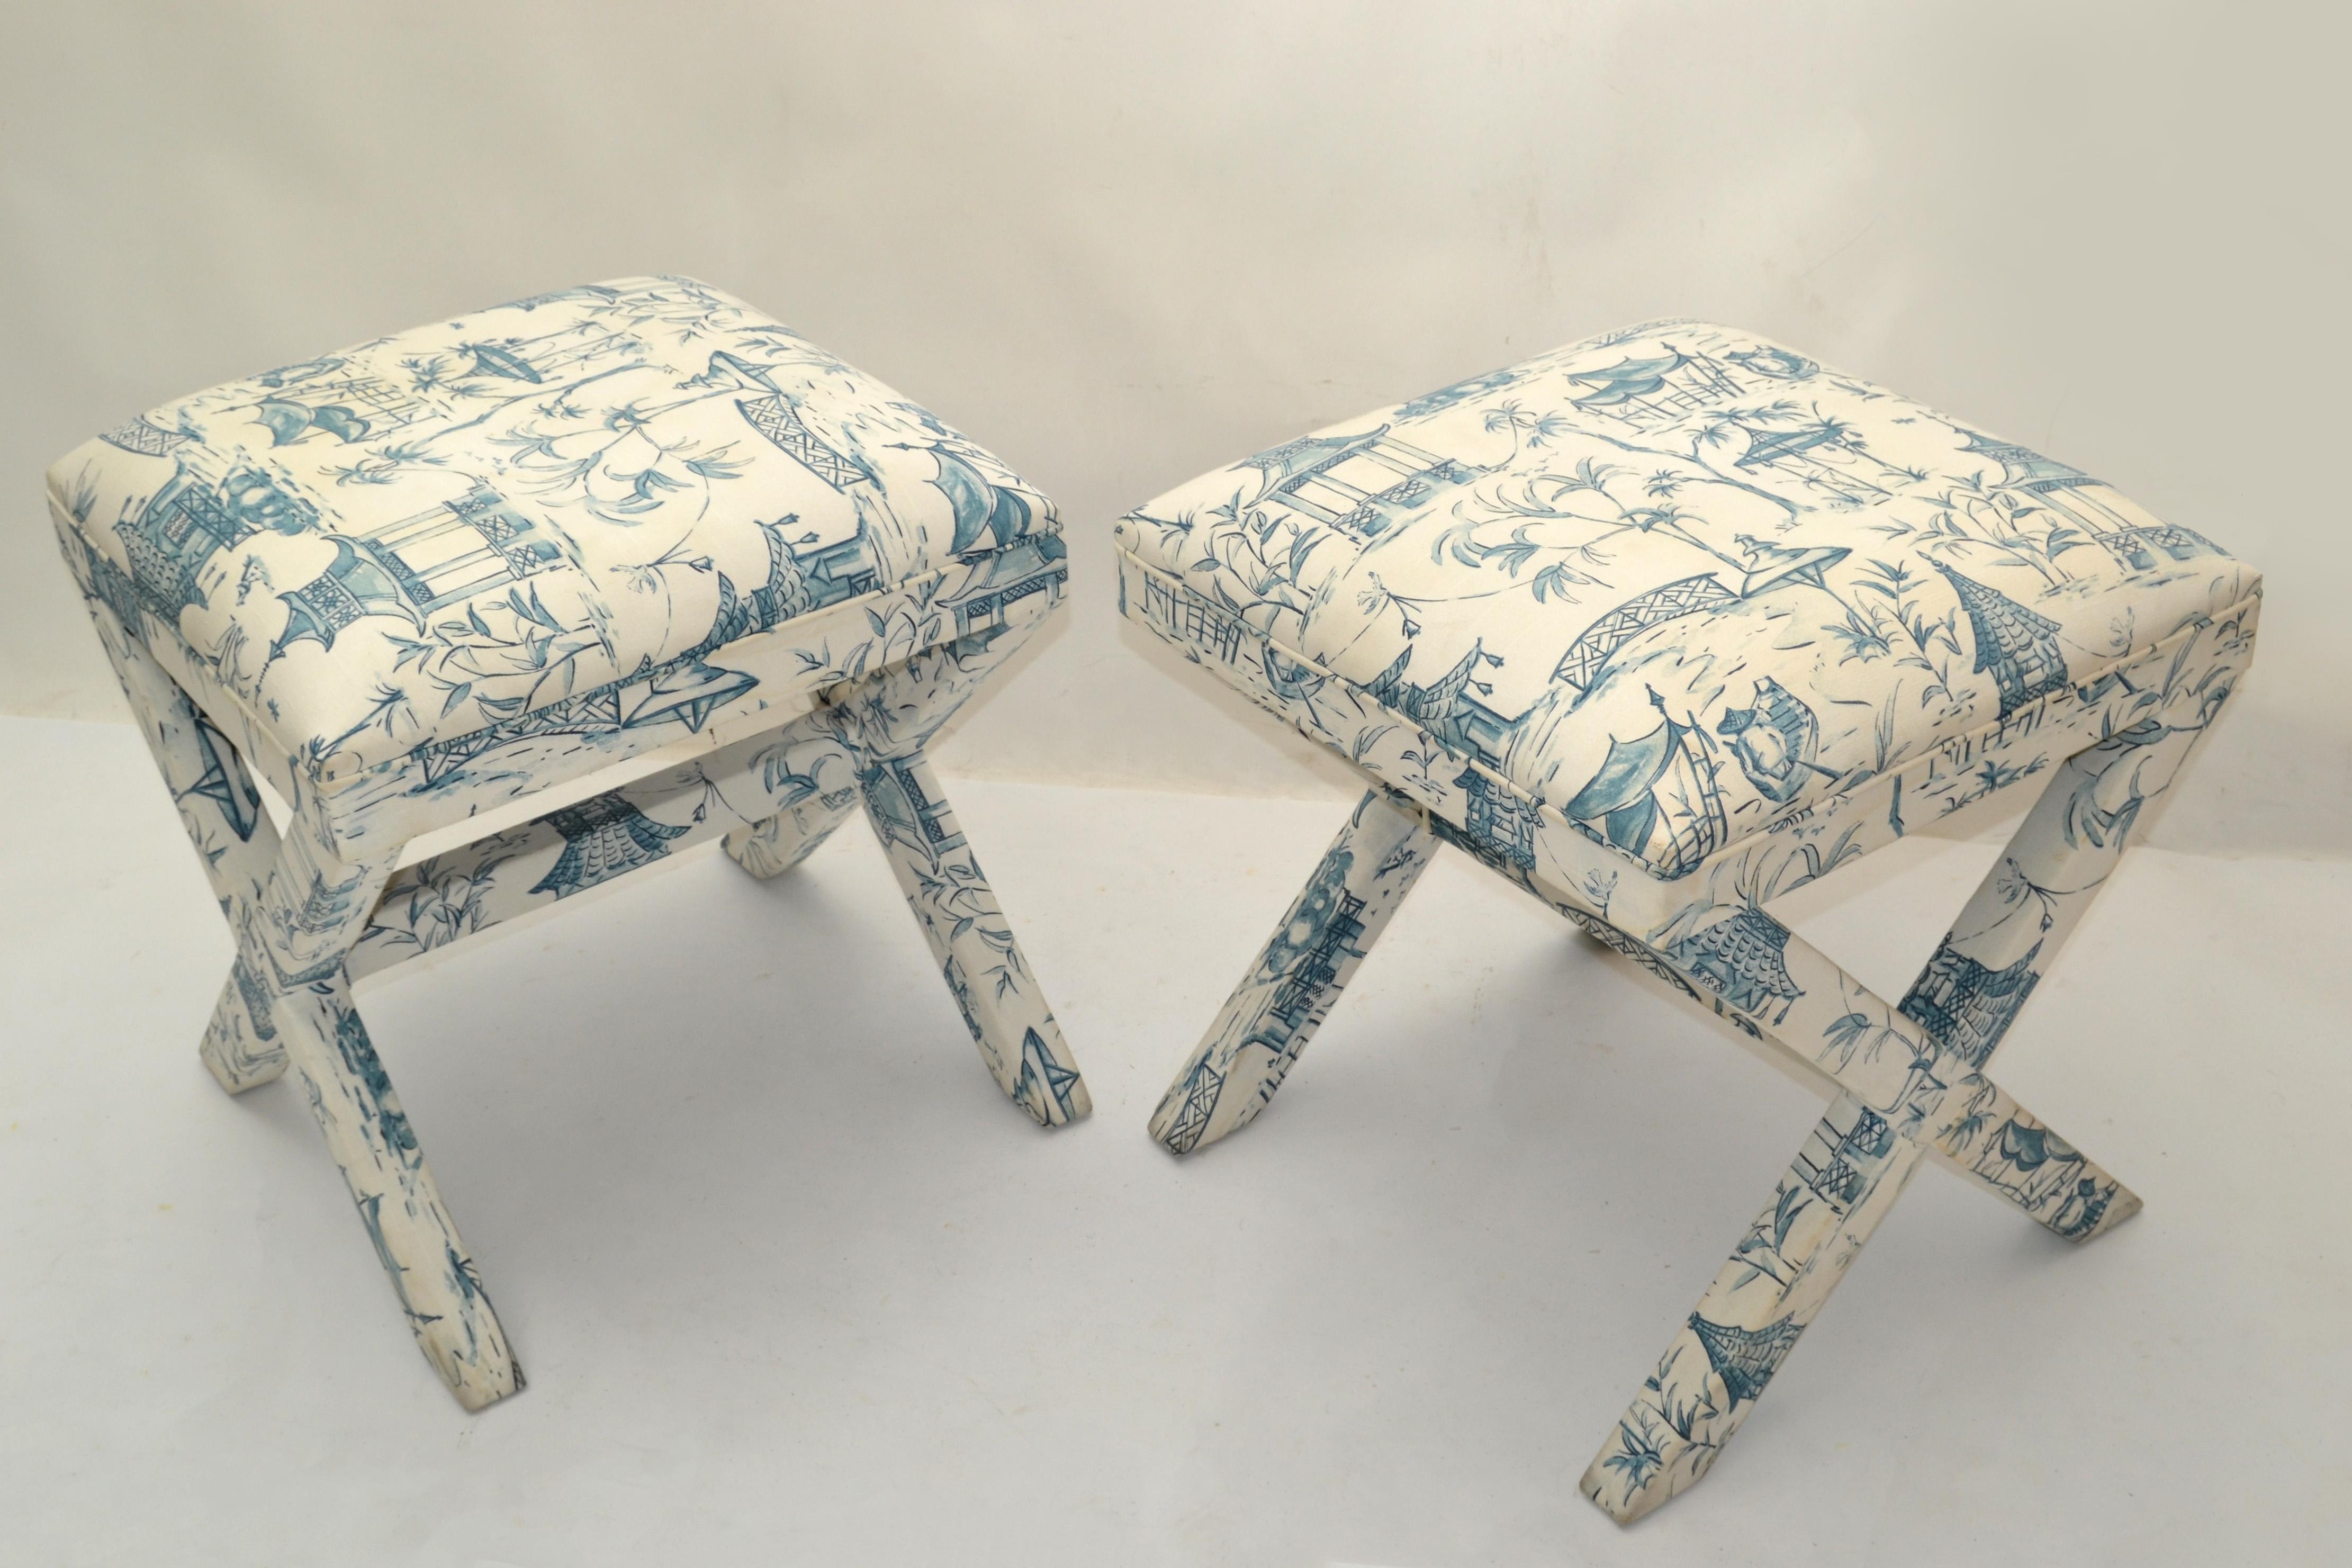 Pair of Mid-Century Modern ottoman, footstools in blue/white Asian motif cotton fabric with decorative X Stretcher.
In all original Condition with some wear to the fabric. We recommend having the set professionally cleaned.